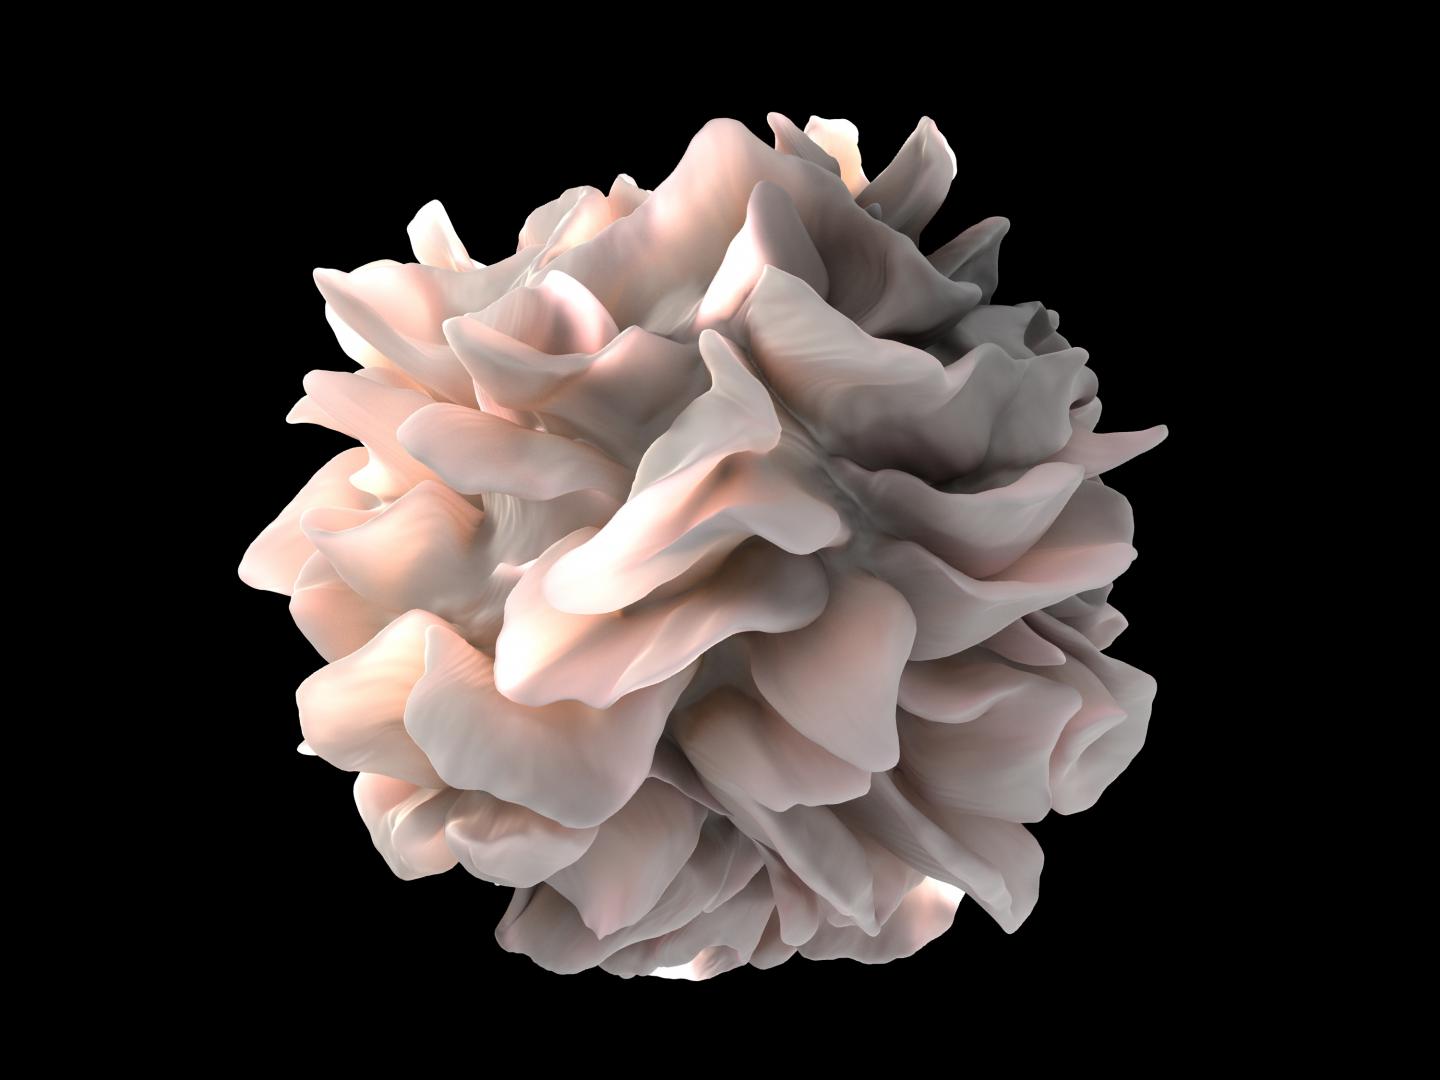 Recruiting Dendritic Cells for Cancer Fight